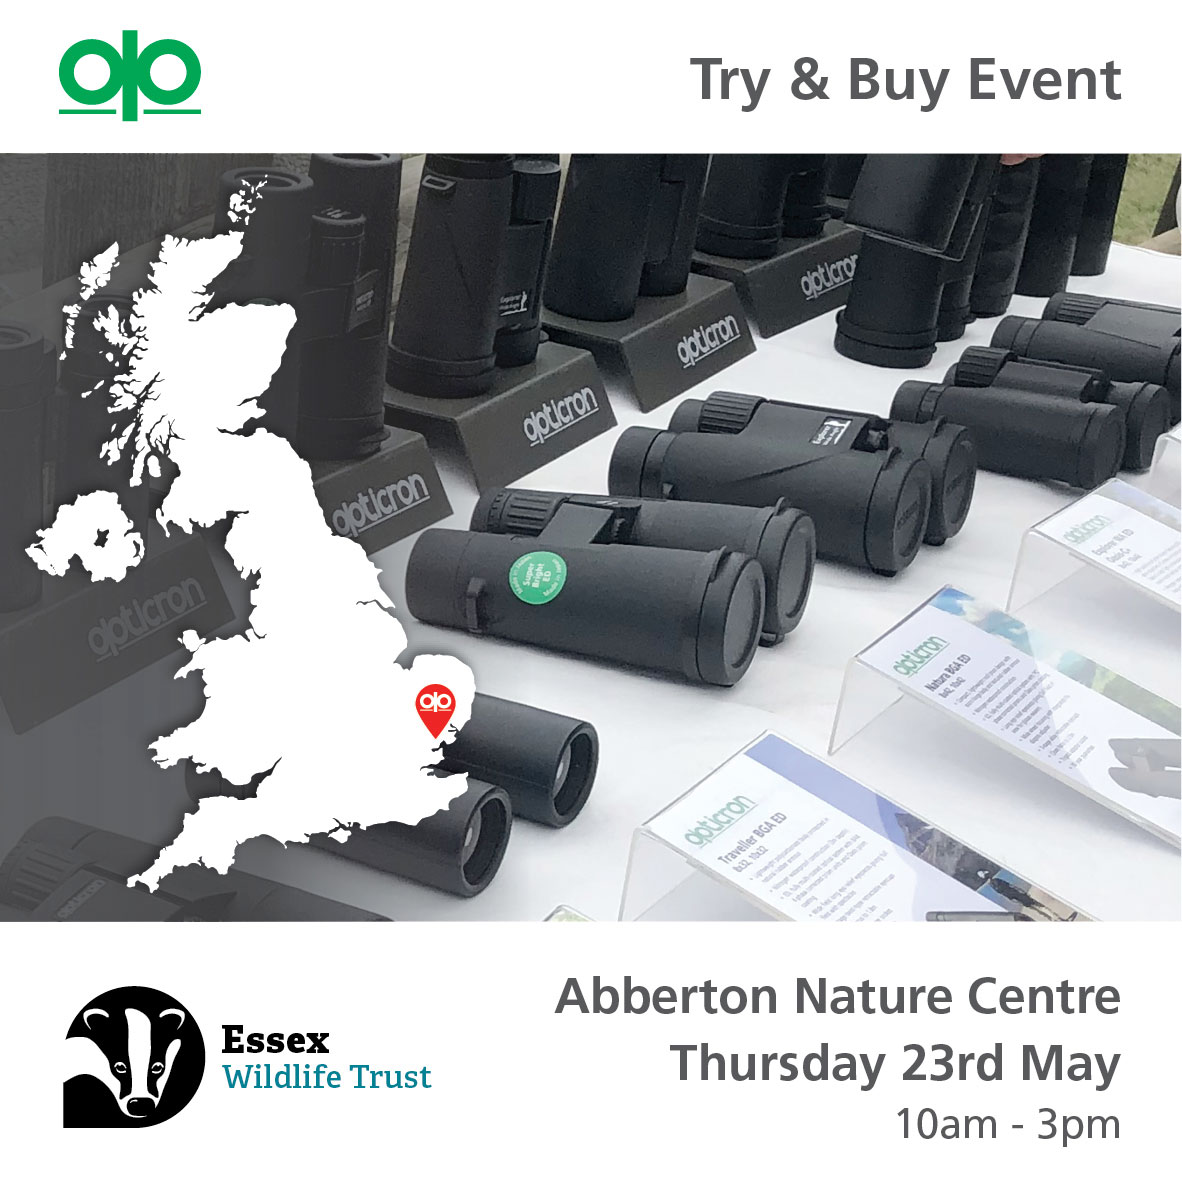 Next week, why not come along to support your local Wildlife Trust, spot some fabulous spring wildlife and test out some of our optics at one of our Try & Buy events? 21/05 Lockley Lodge @WTSWW 22/05 Hanningfield Reservoir @EssexWildlife 23/05 Abberton Reservoir @EssexWildlife